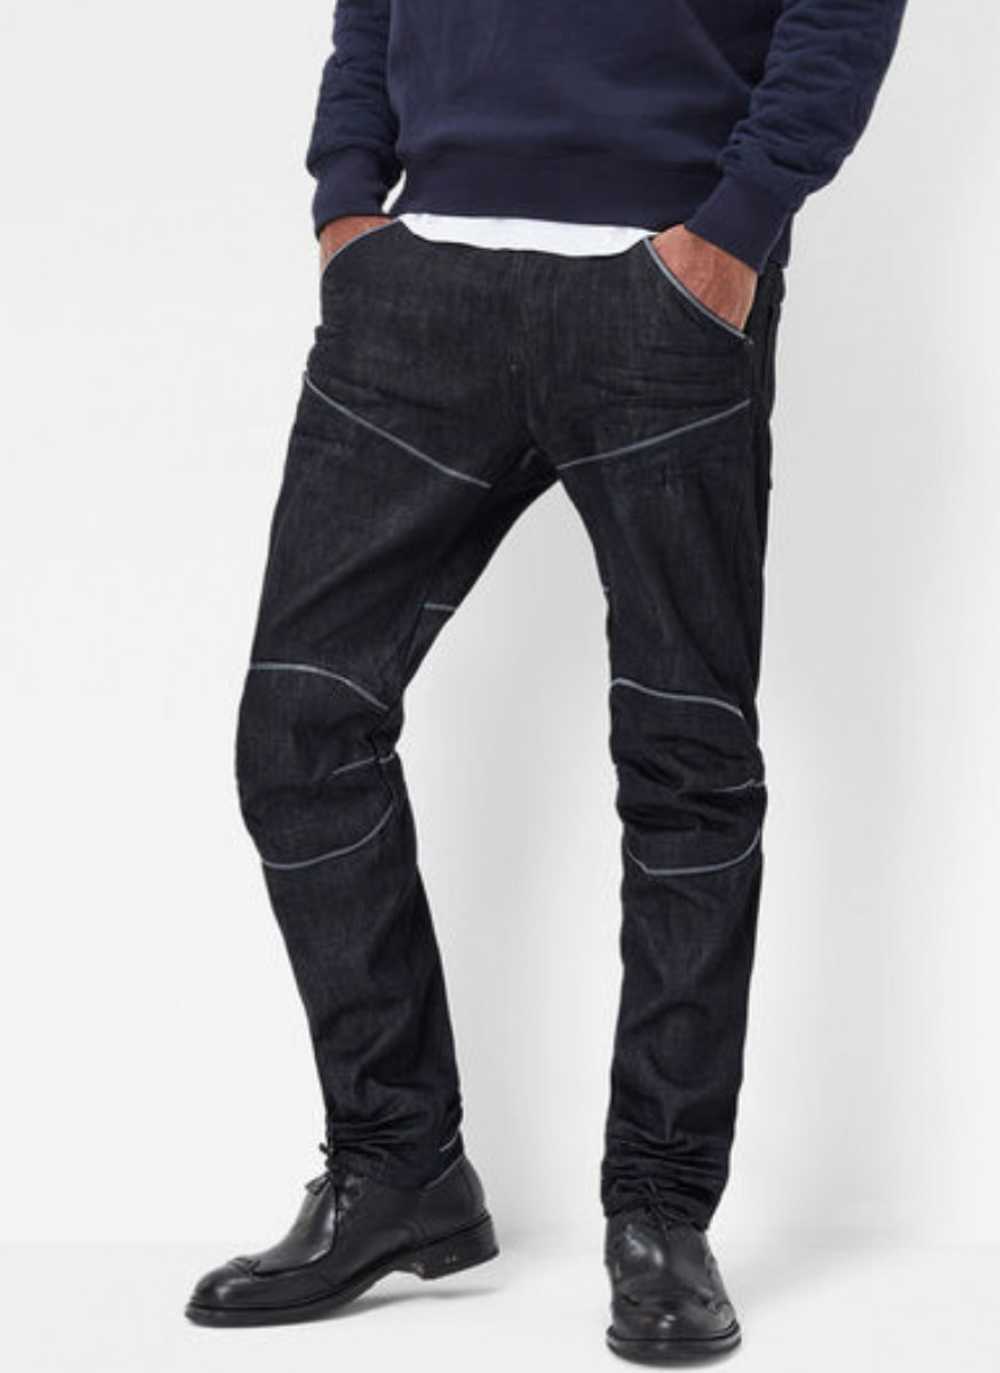 Gstar - G-STAR RAW 5620 Explained 3D Tapered Oxfo… - image 1